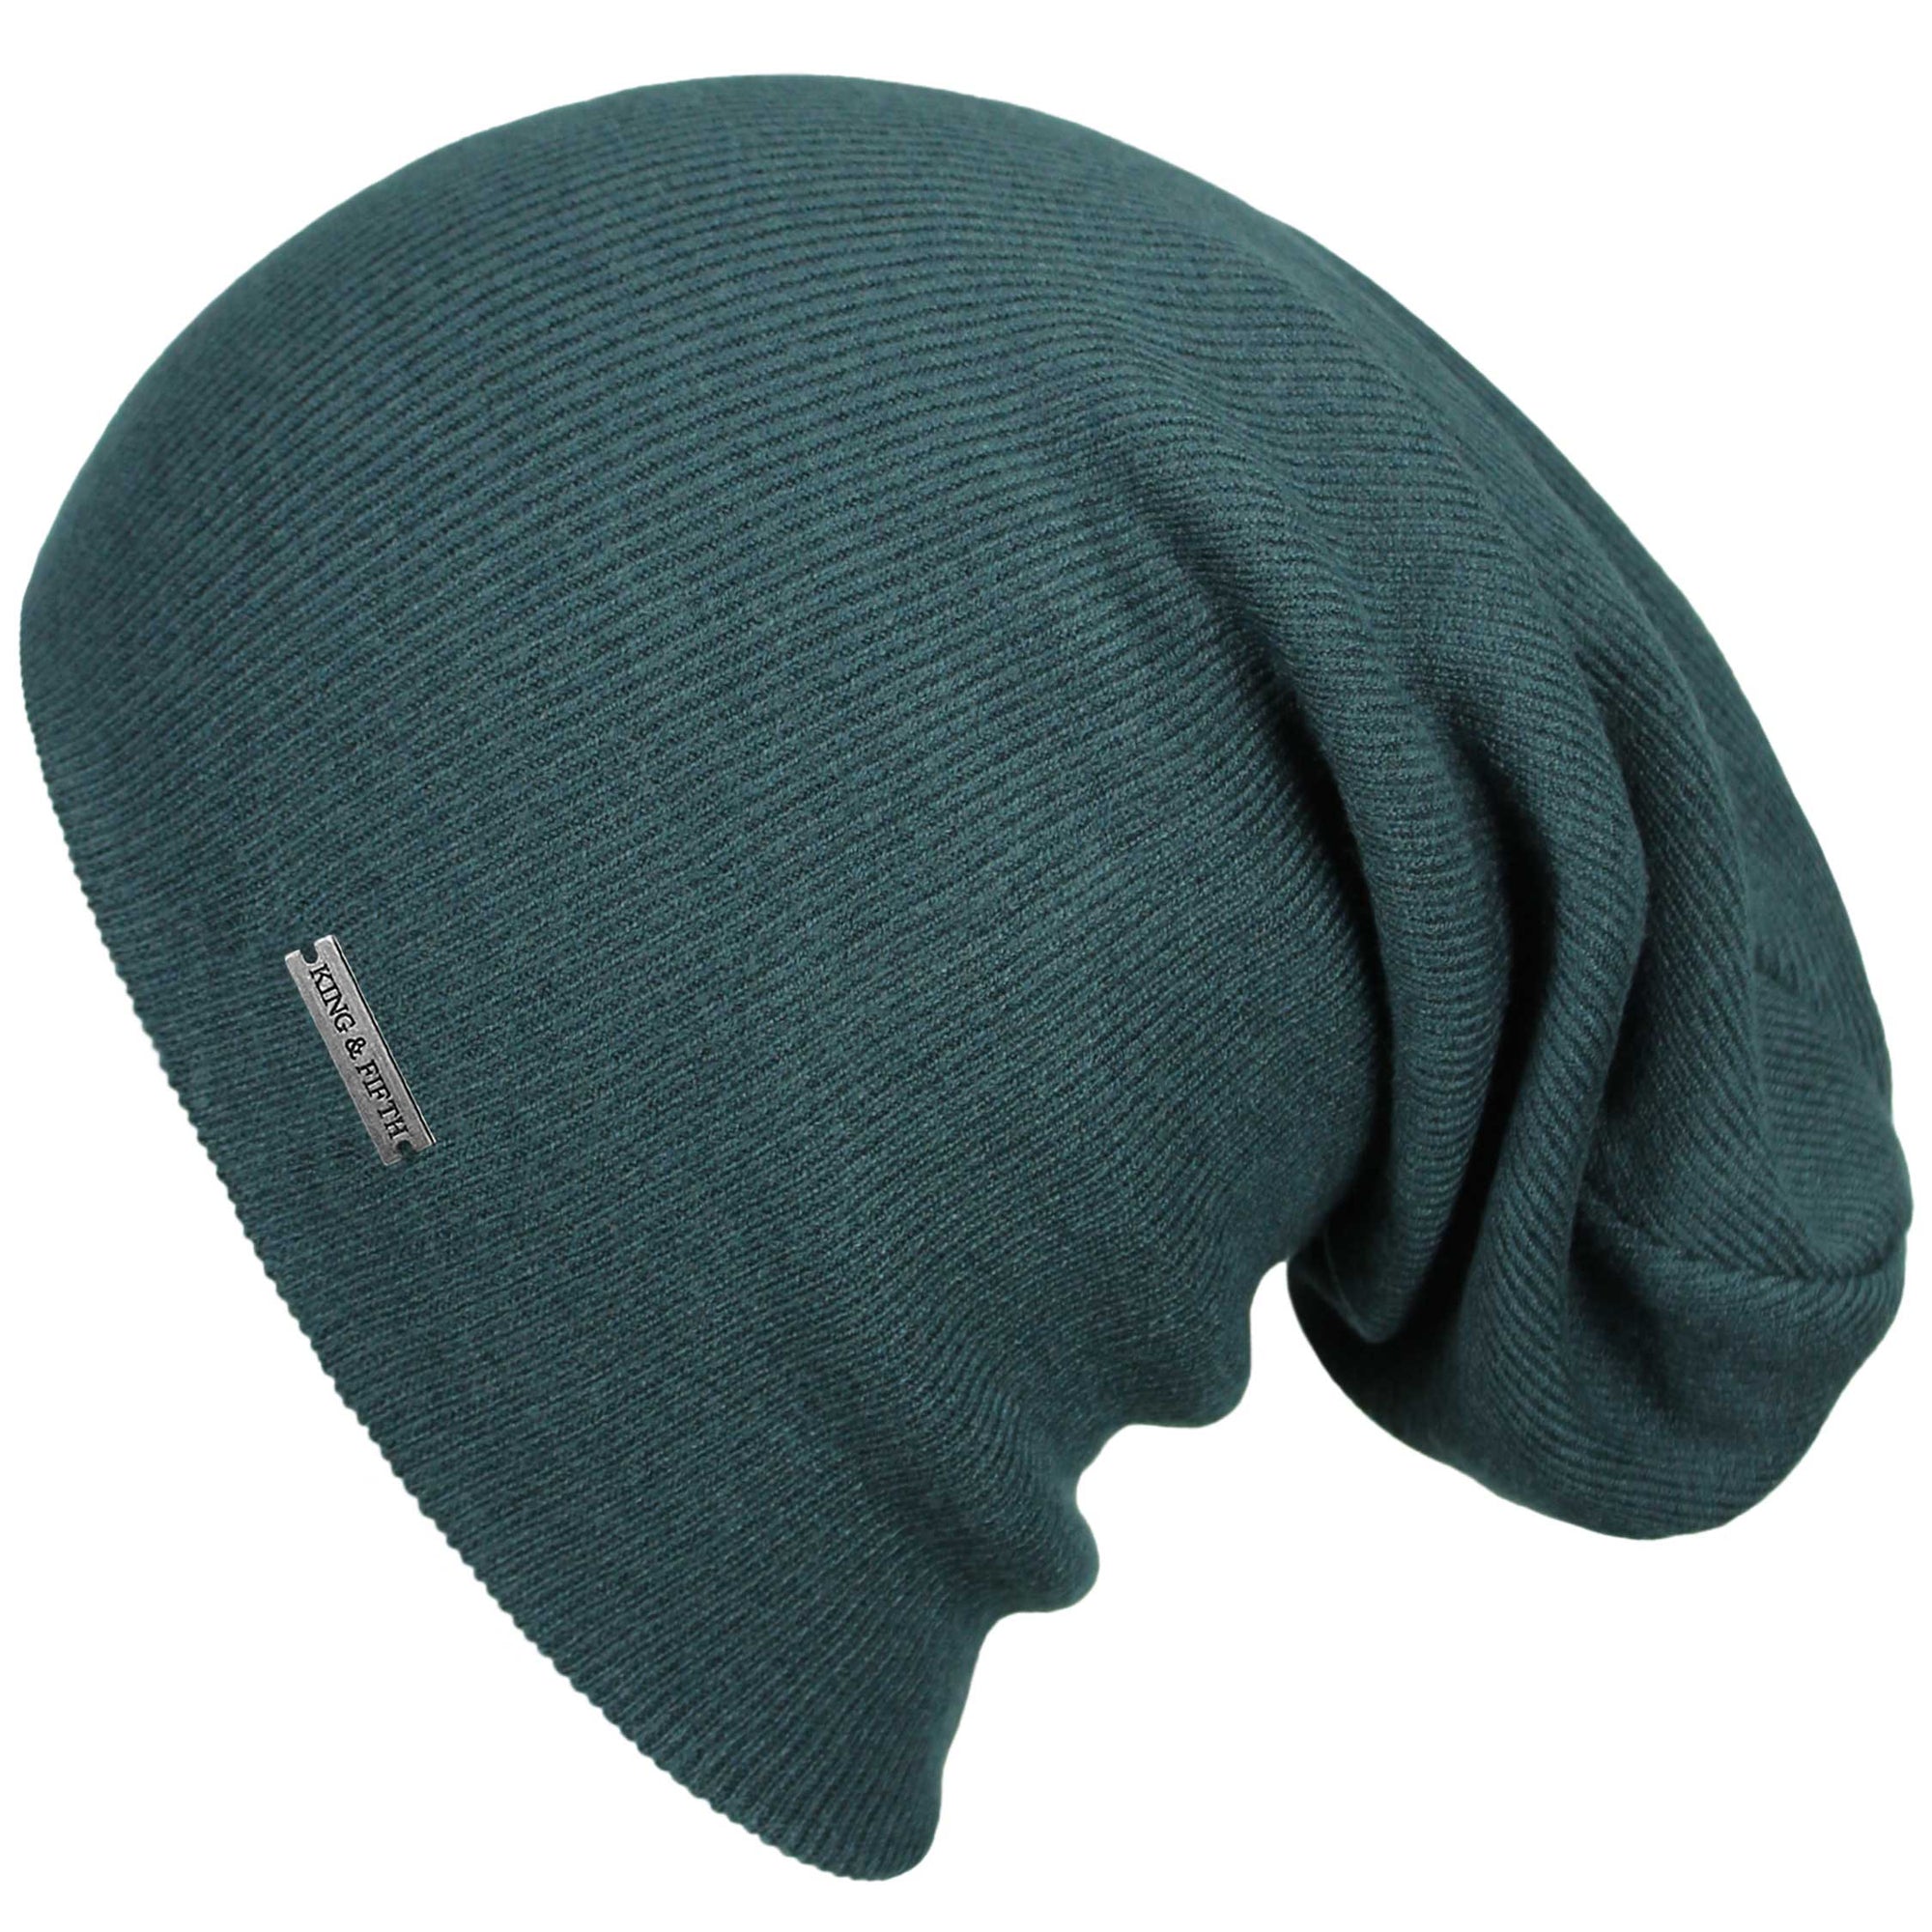 Extra Large Slouchy Beanie for Men